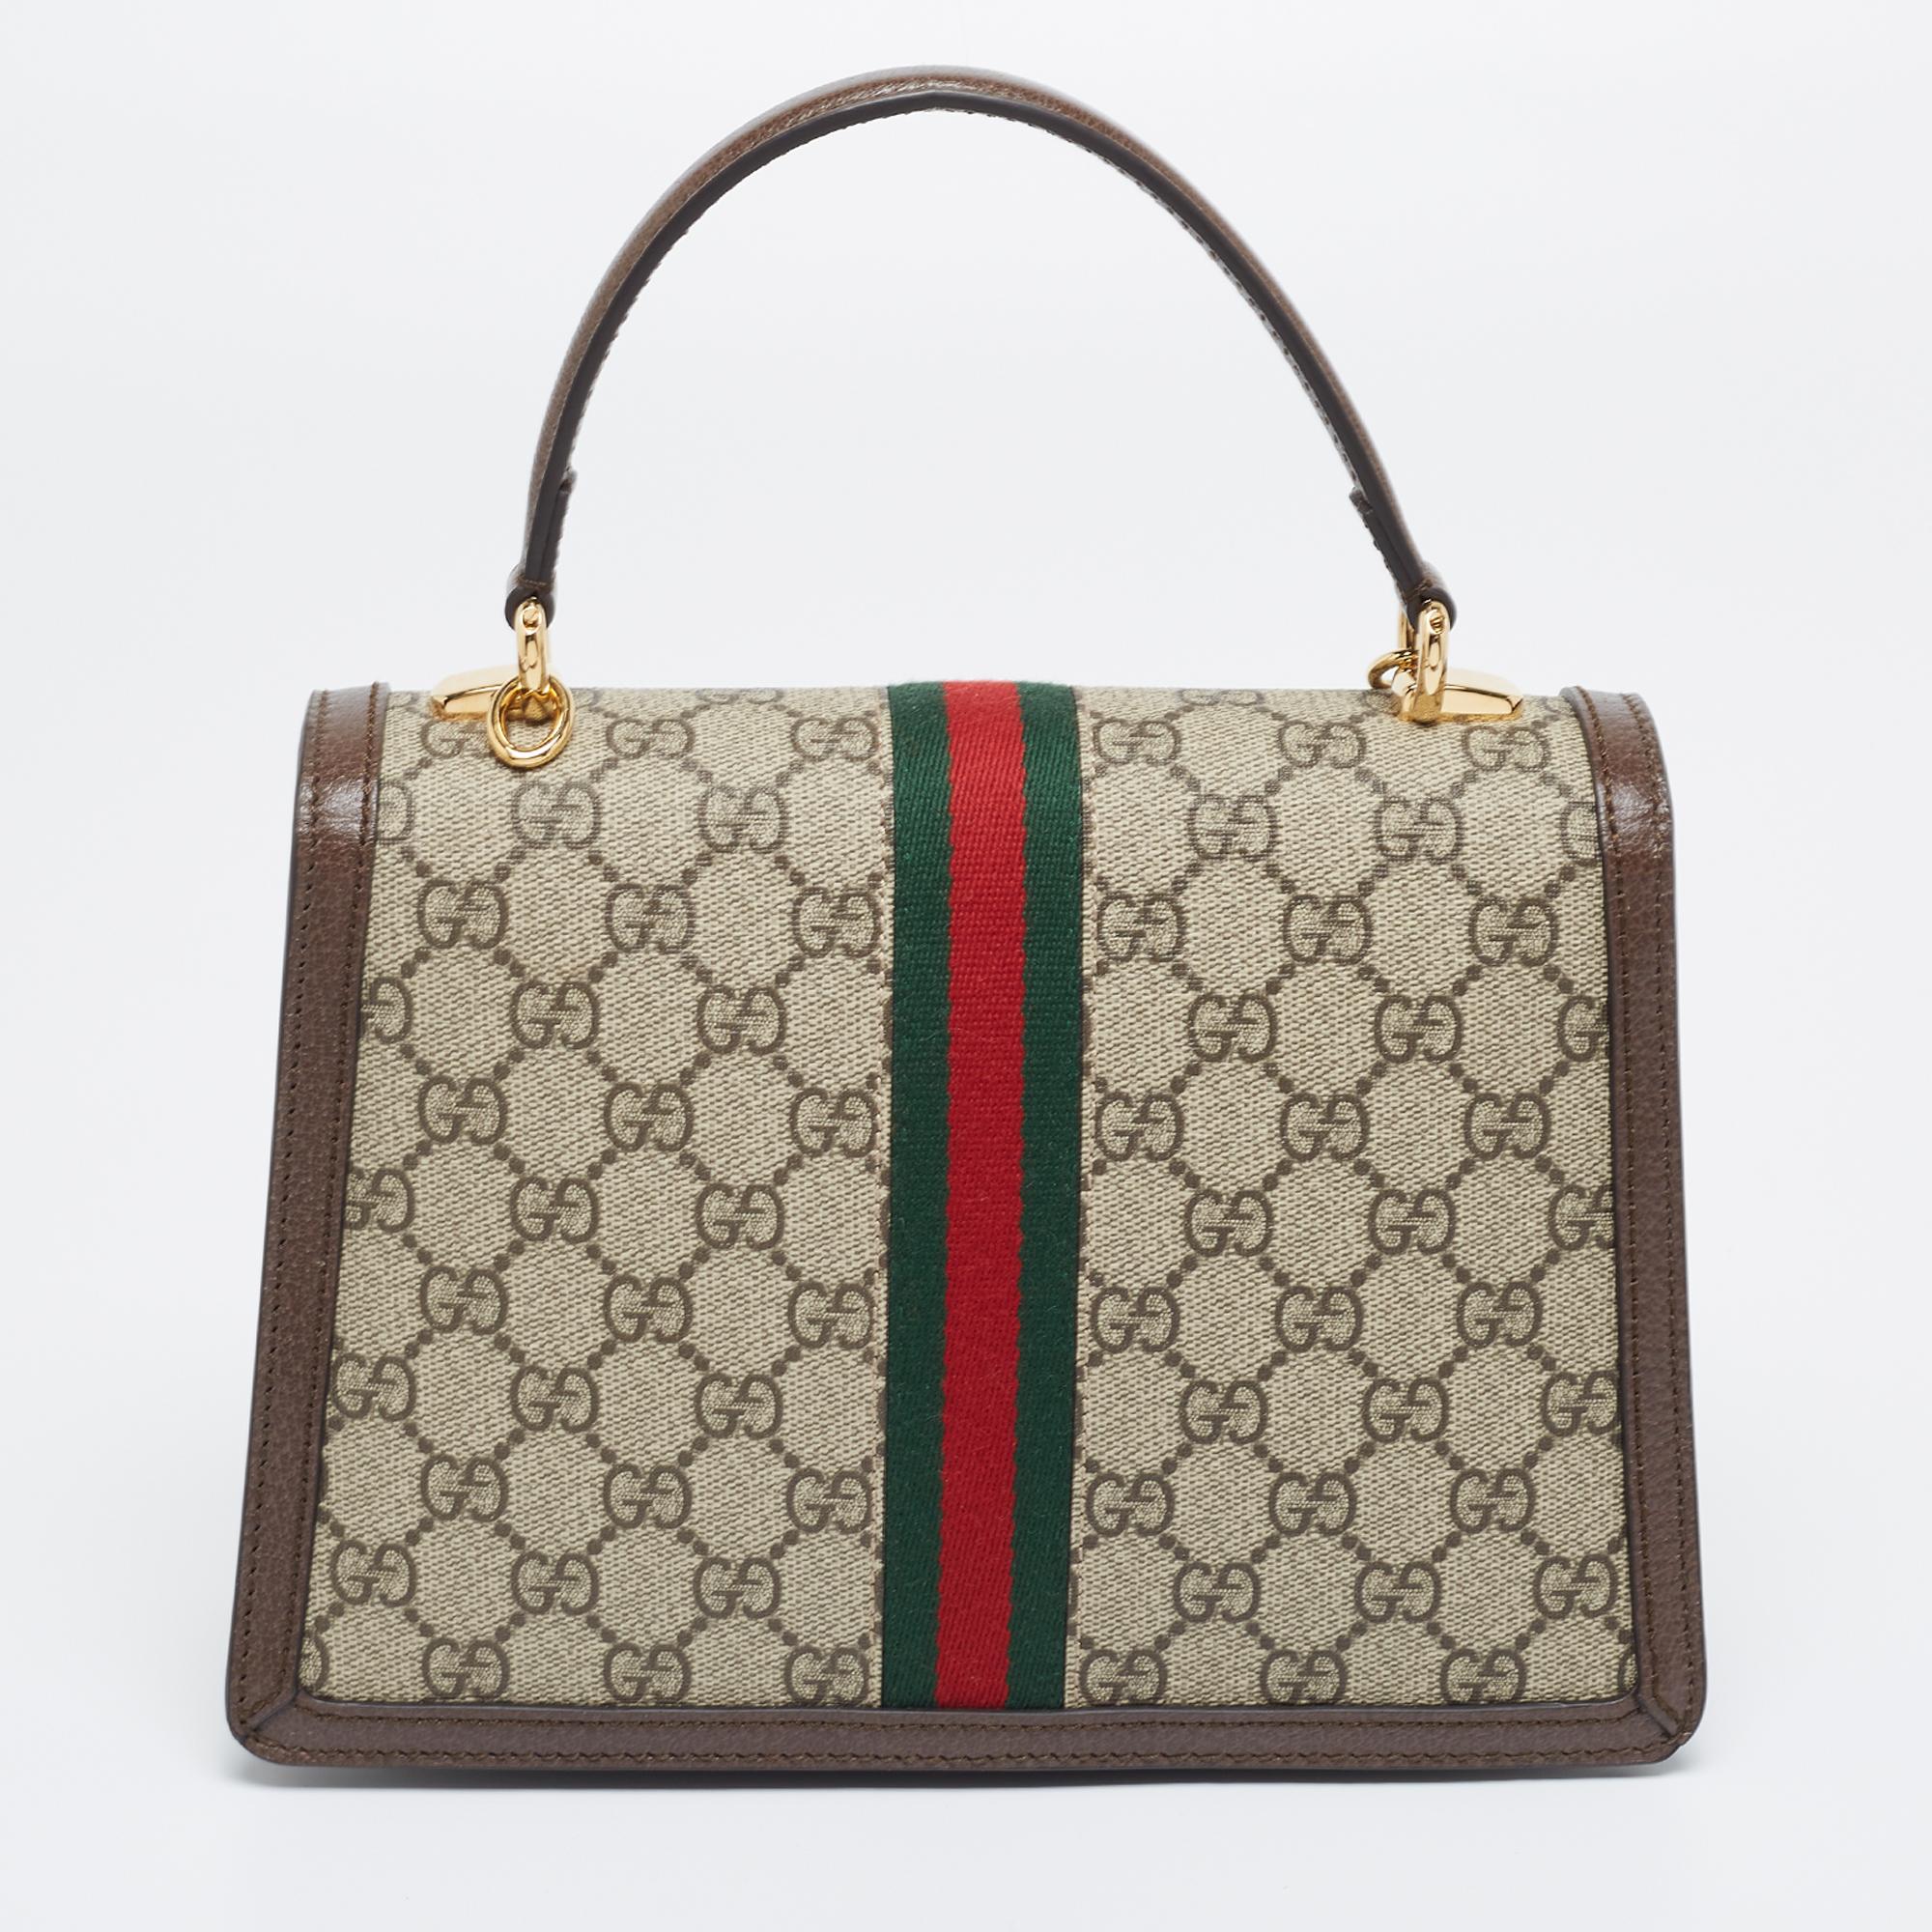 You will enjoy parading this fabulous bag from Gucci. It comes made from GG Supreme canvas and leather and features a single top handle and a detachable strap. It is equipped with a capacious interior meant to hold all your daily essentials with